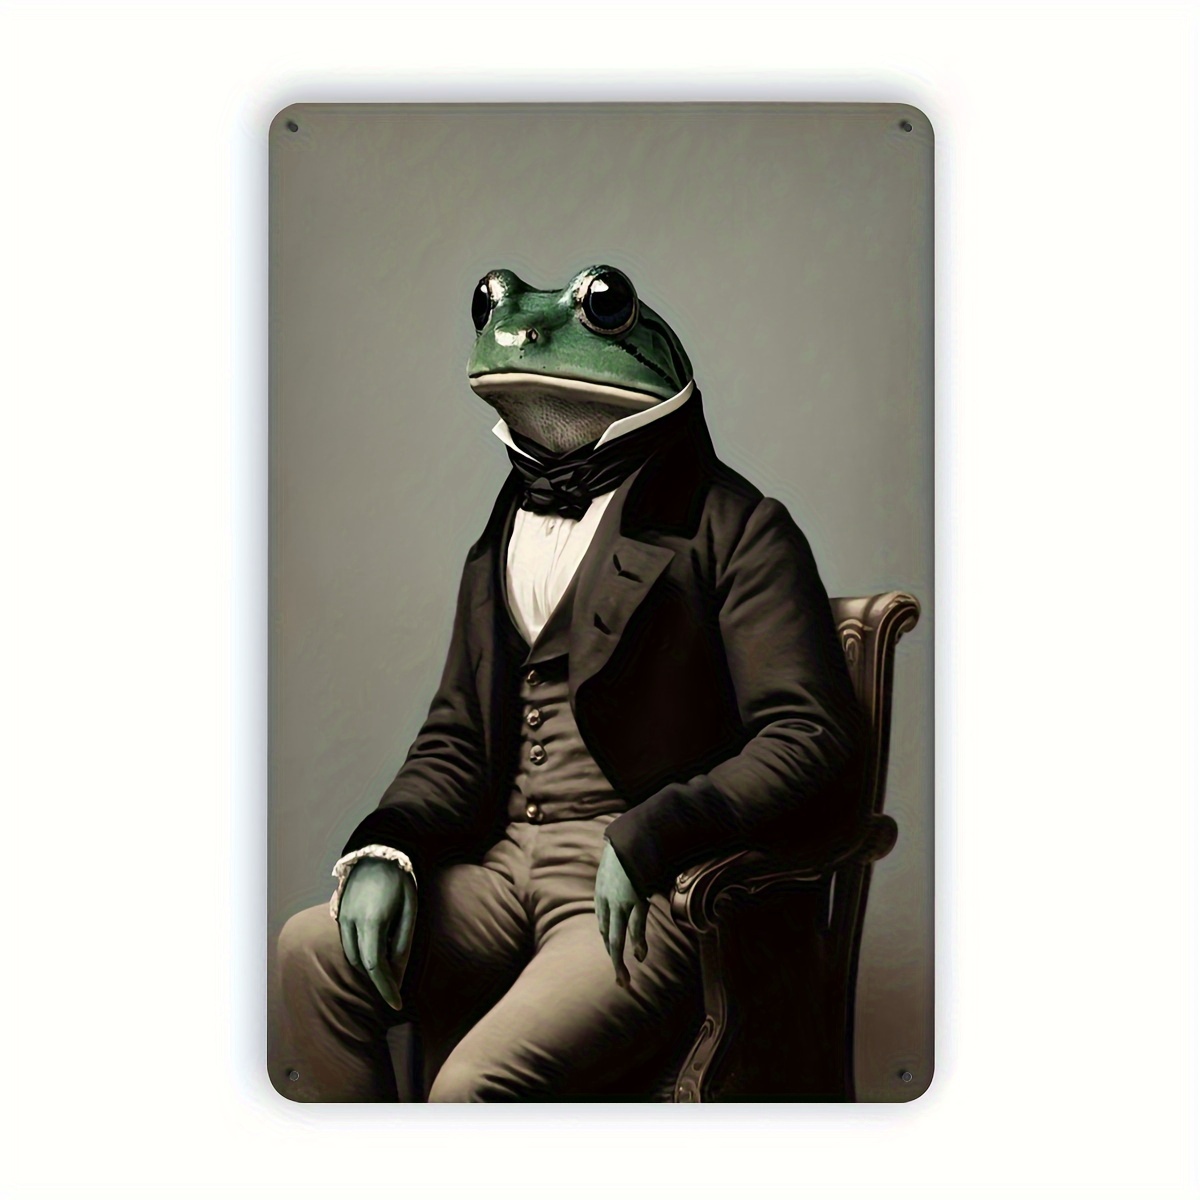 

Vintage Gentleman Frog Metal Tin Sign - Rustic Farmhouse Wall Decor For Bedroom, Cave, Or Home